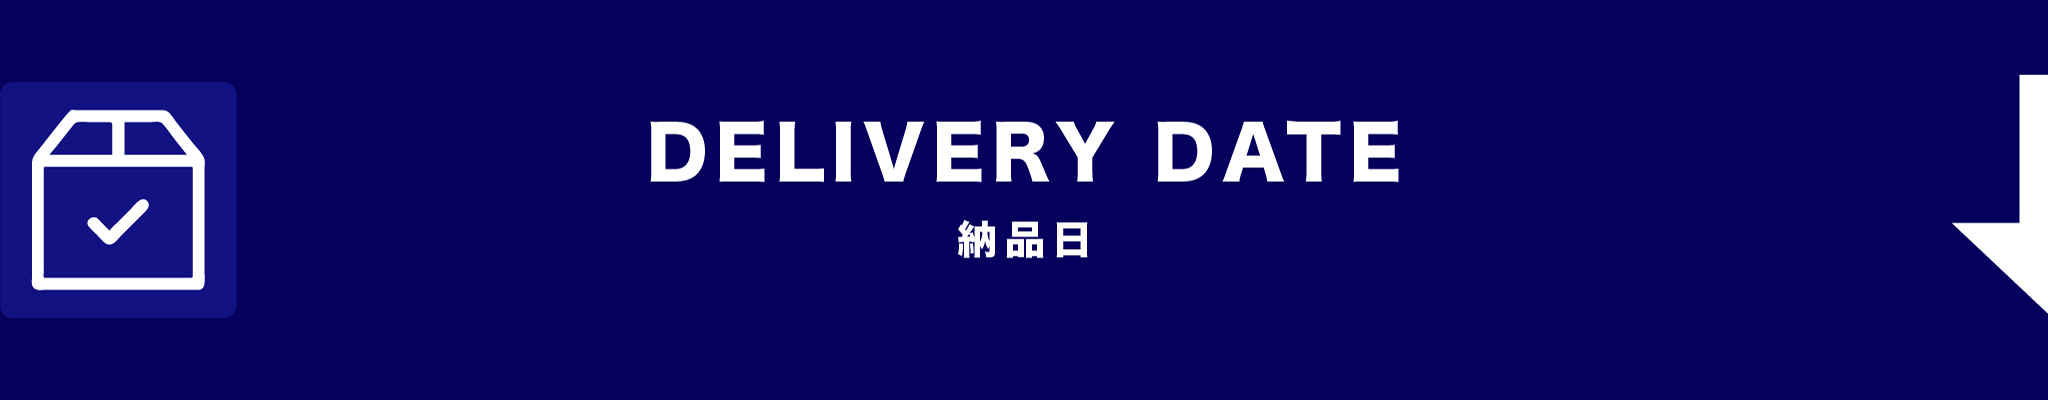 DELIVERY DATE B3 1 408